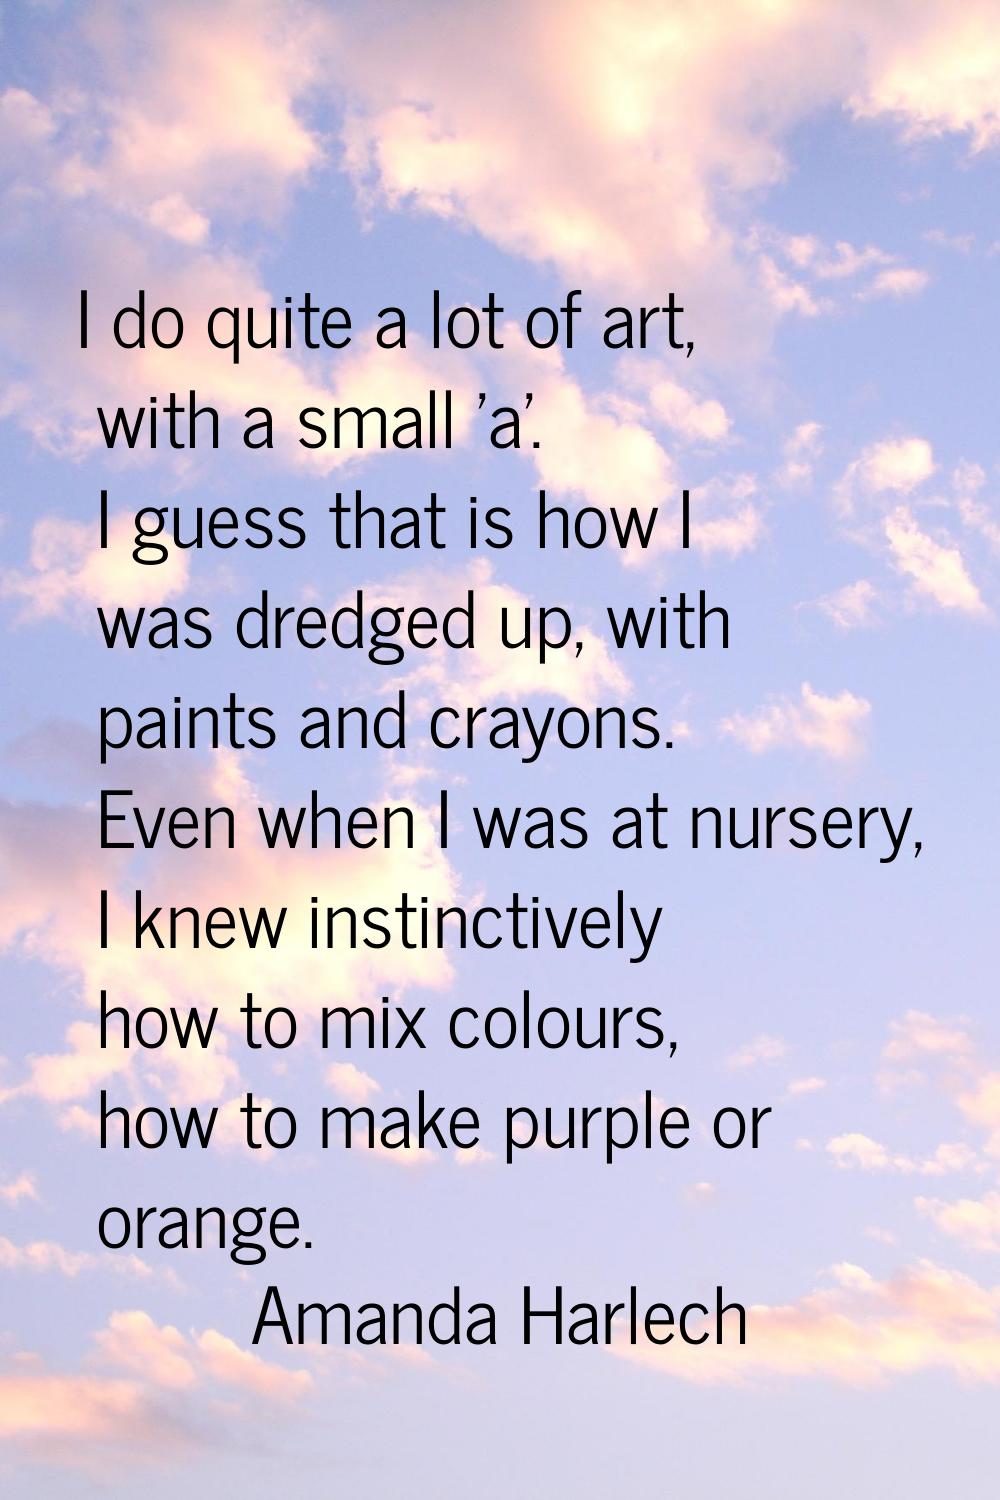 I do quite a lot of art, with a small 'a'. I guess that is how I was dredged up, with paints and cr